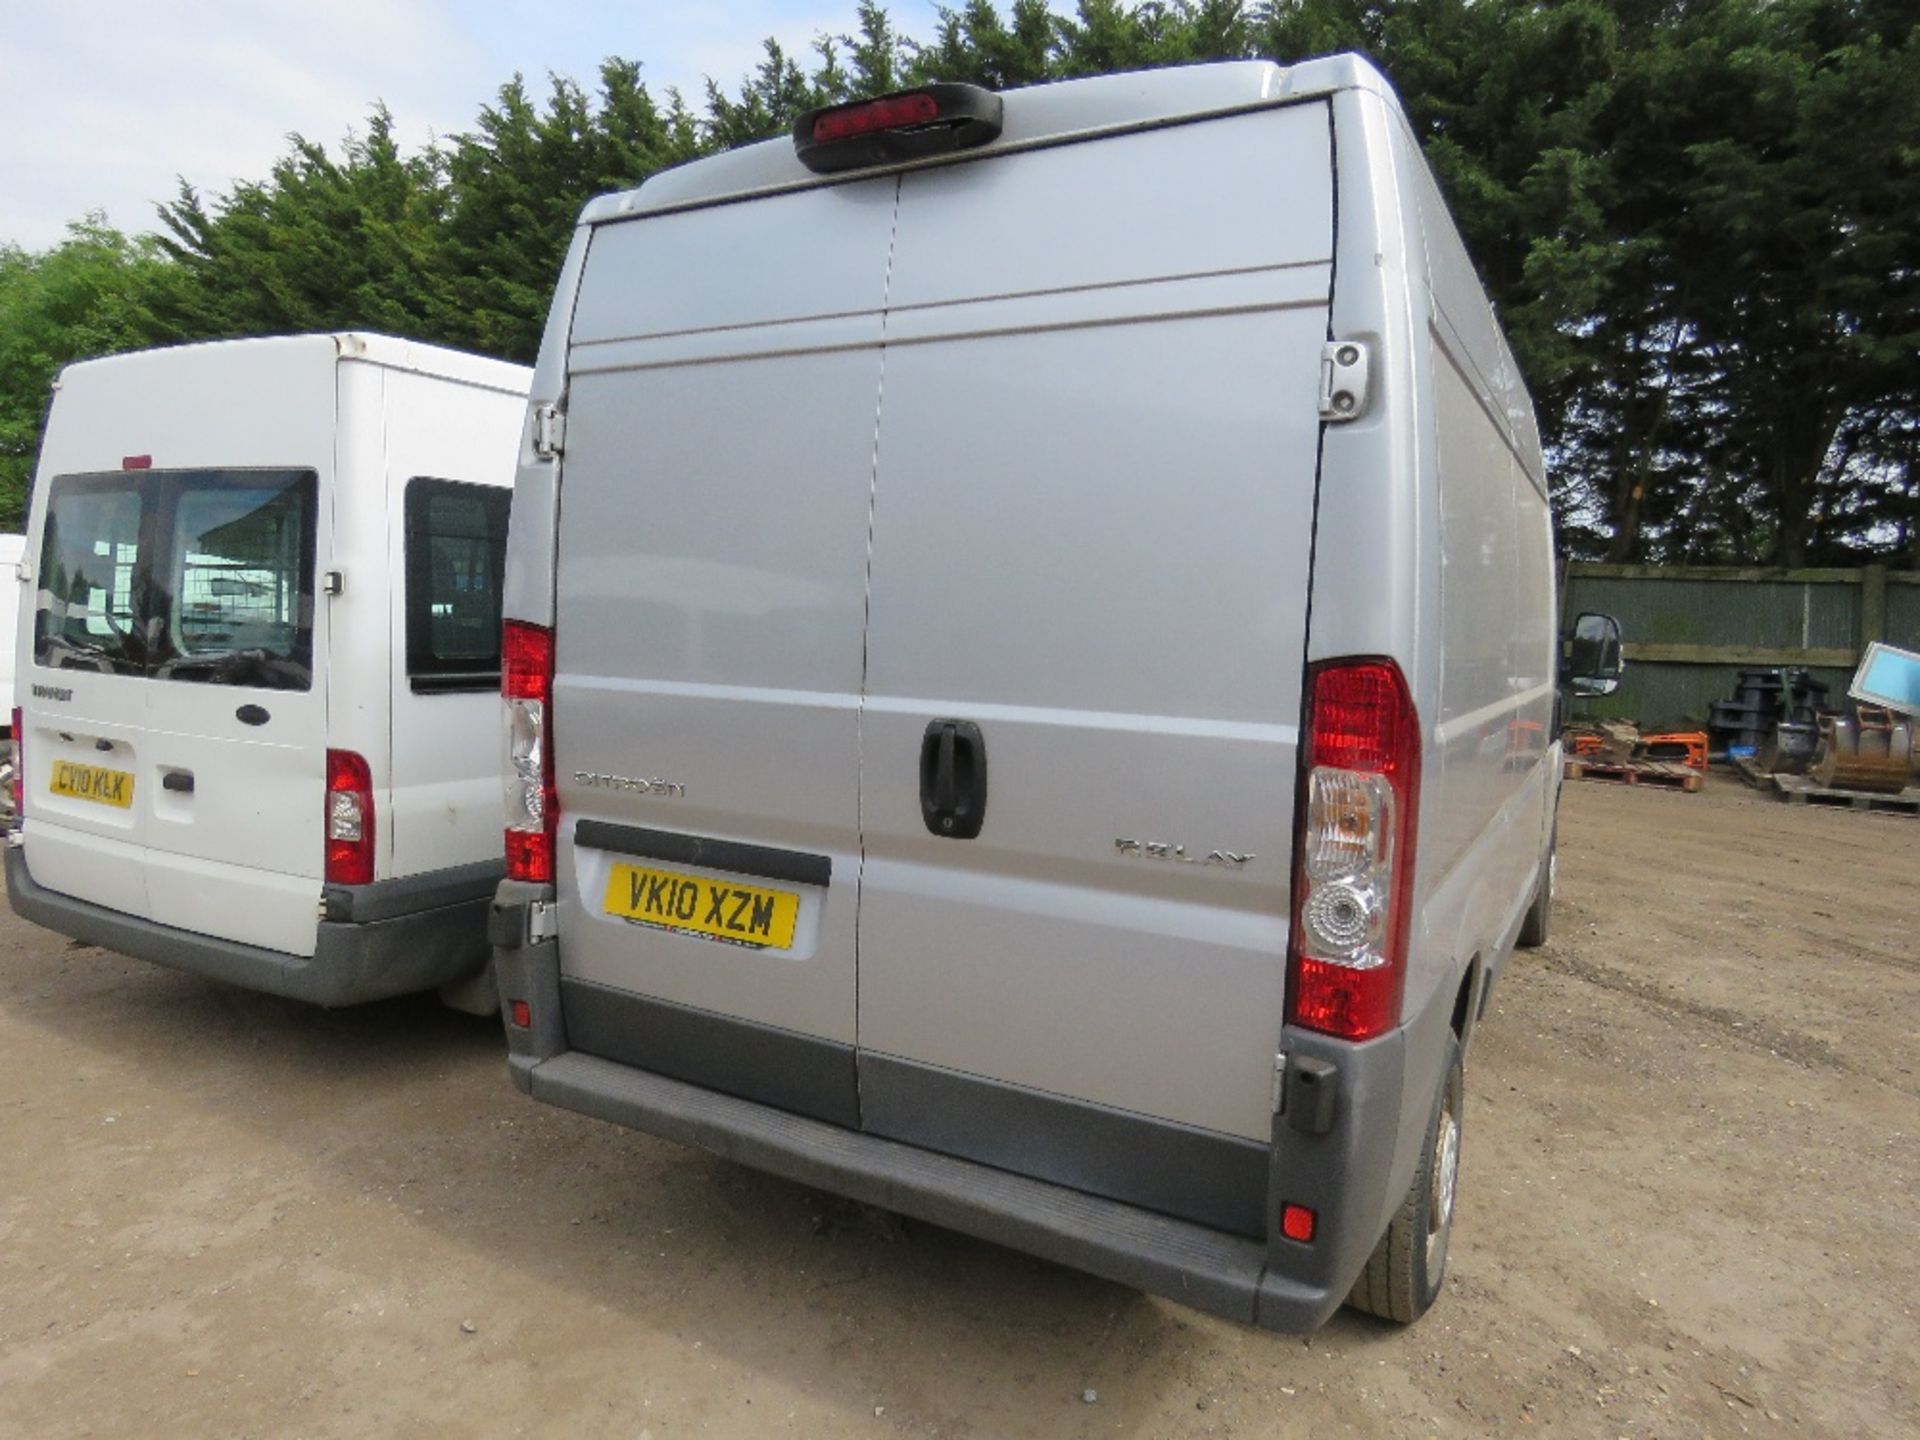 CITROEN RELAY SILVER PANEL VAN REG;VK10 XZM TESTED TILL 4/6/20 164,290 REC MILES. WHEN TESTED W - Image 7 of 10